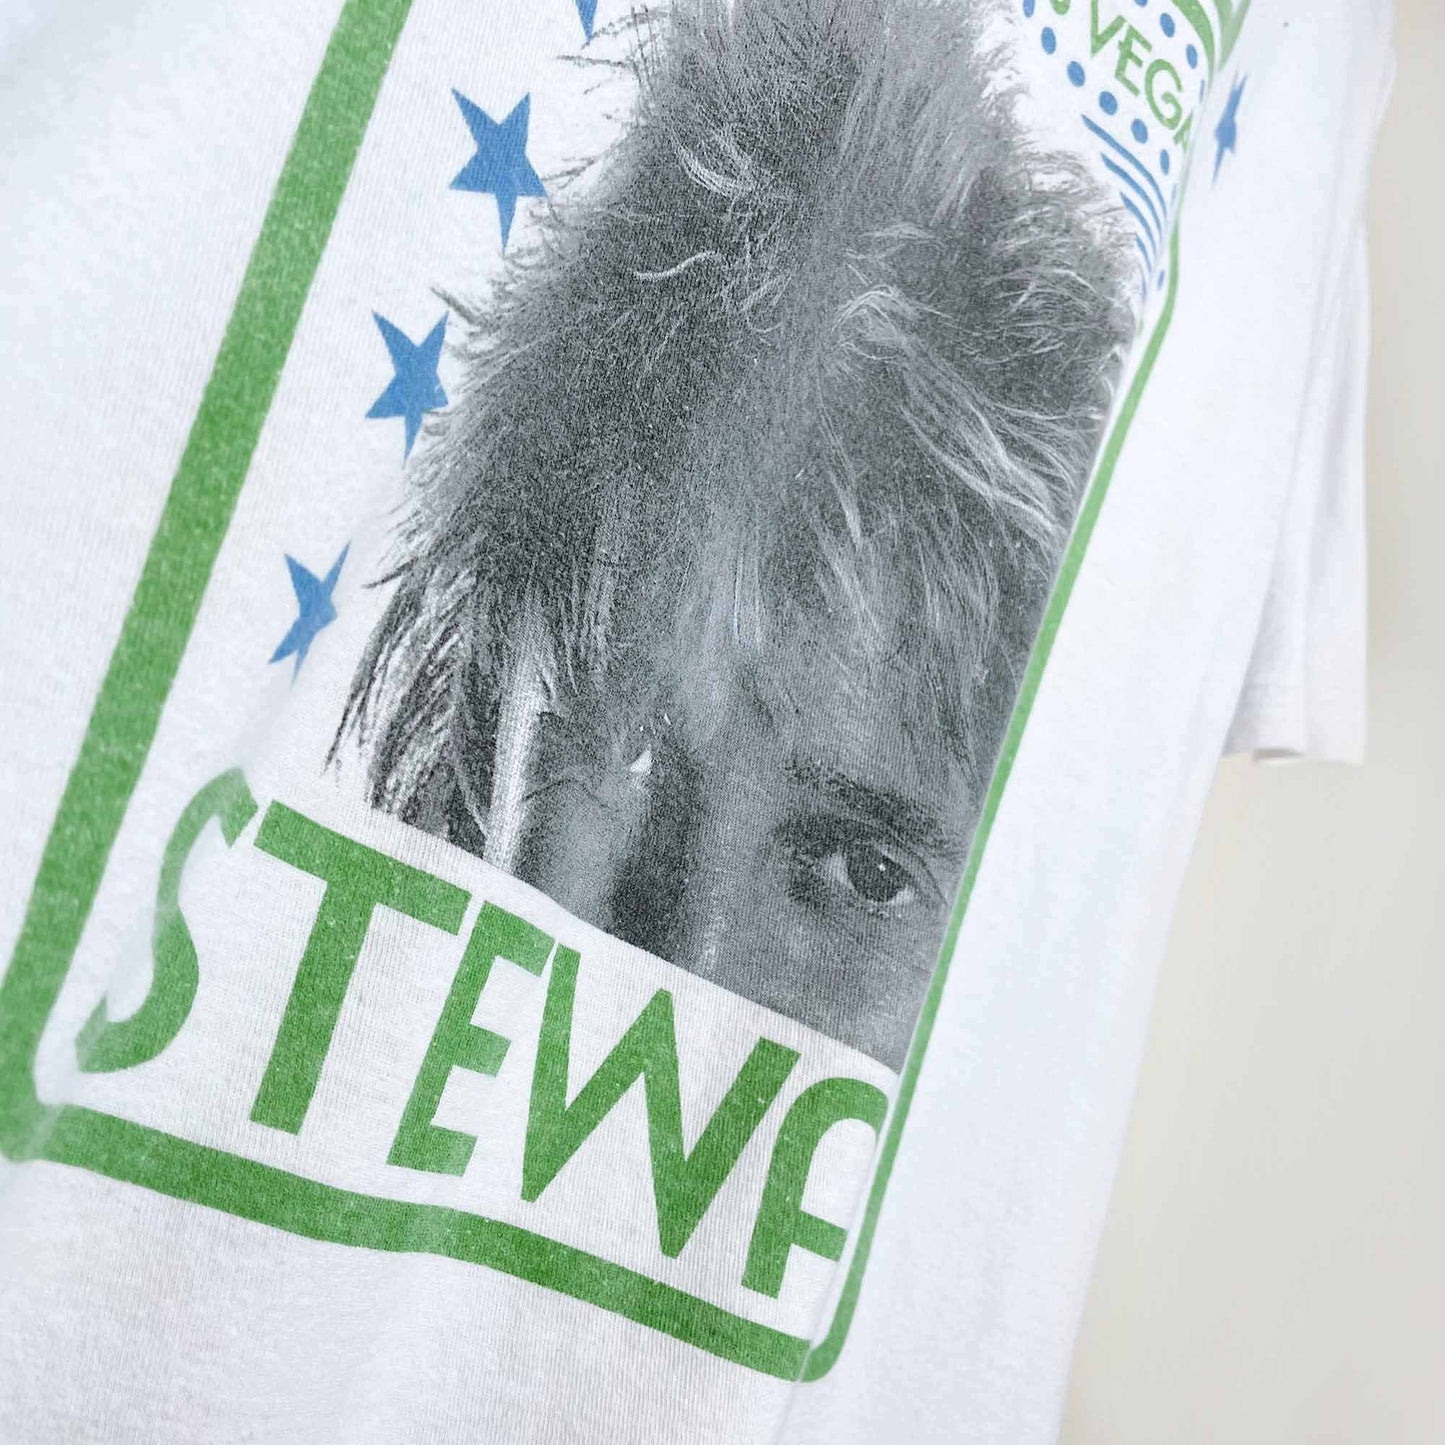 rod stewart live in las vegas graphic tee - size large